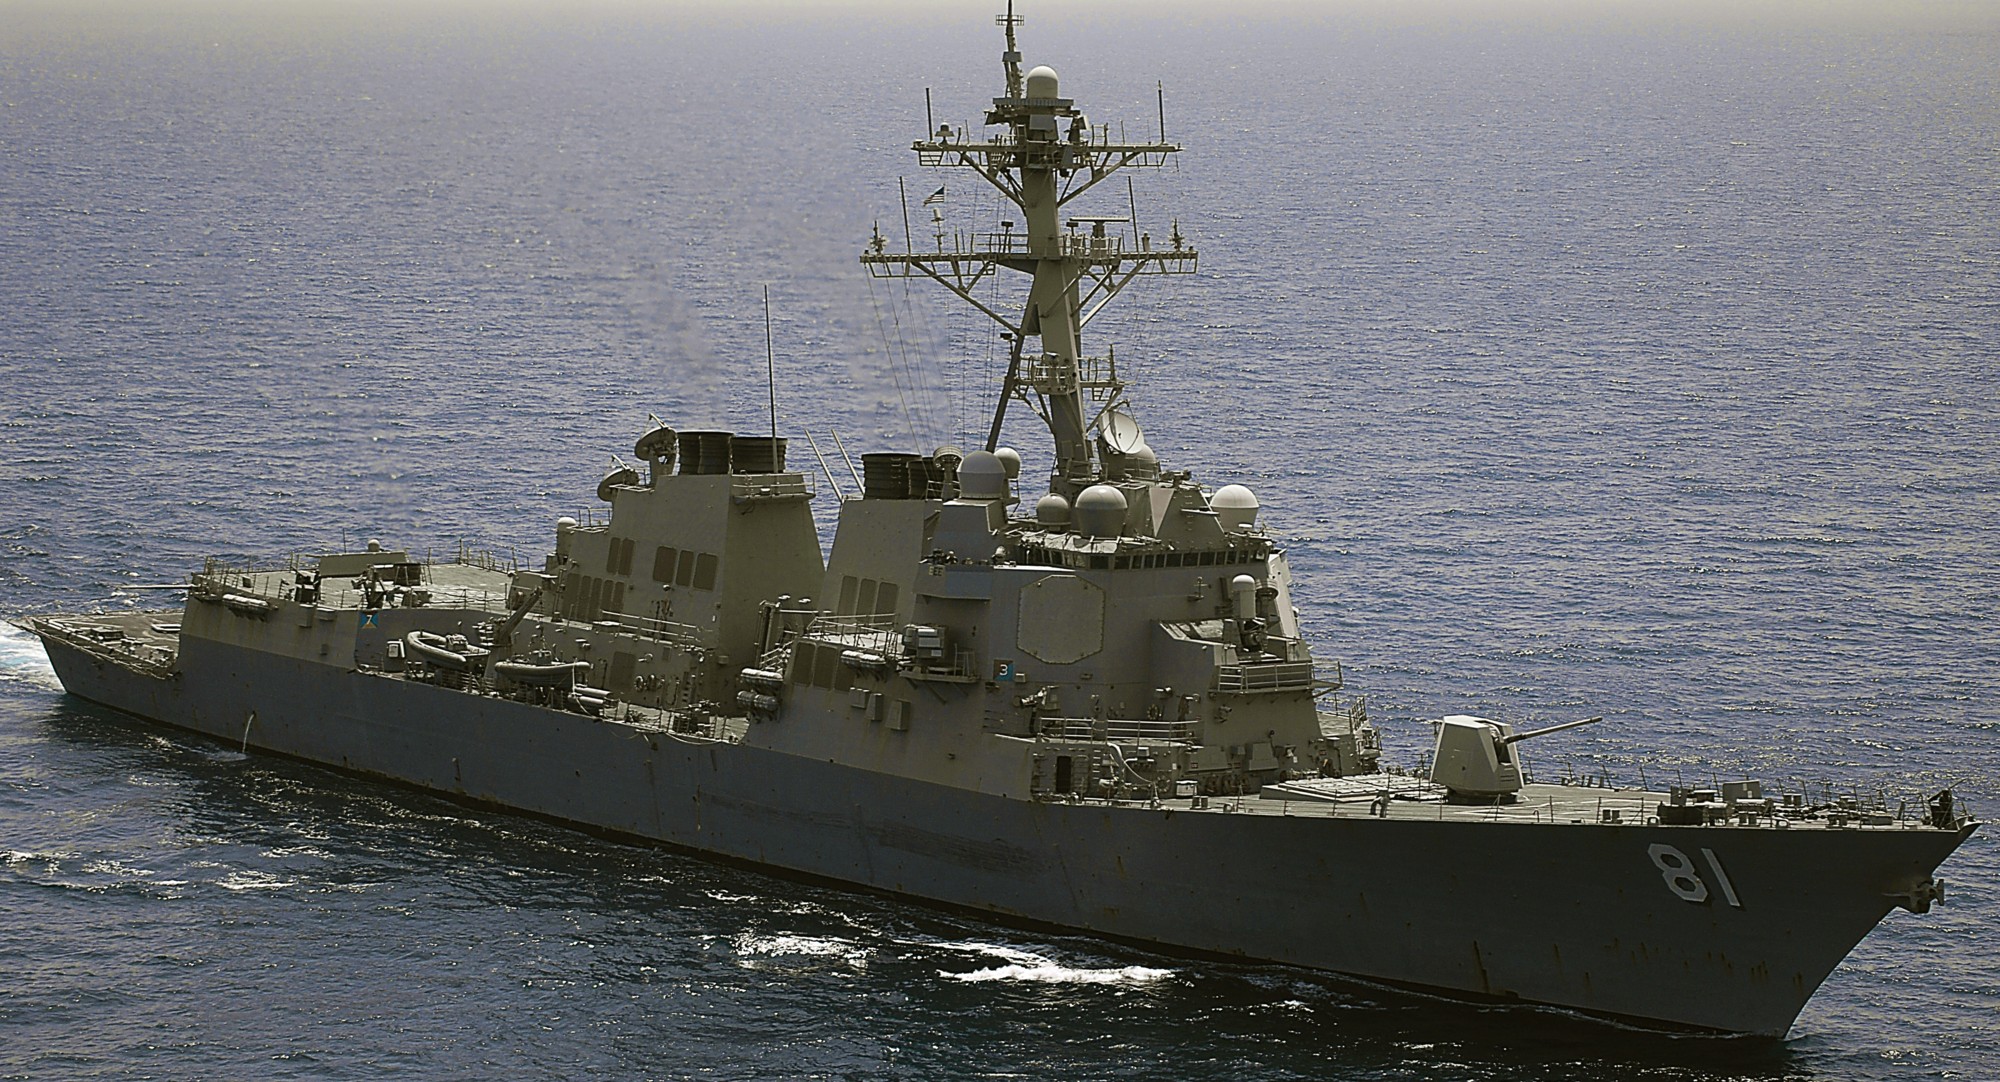 ddg-81 uss winston s. churchill arleigh burke class guided missile destroyer aegis 49 off djibouti